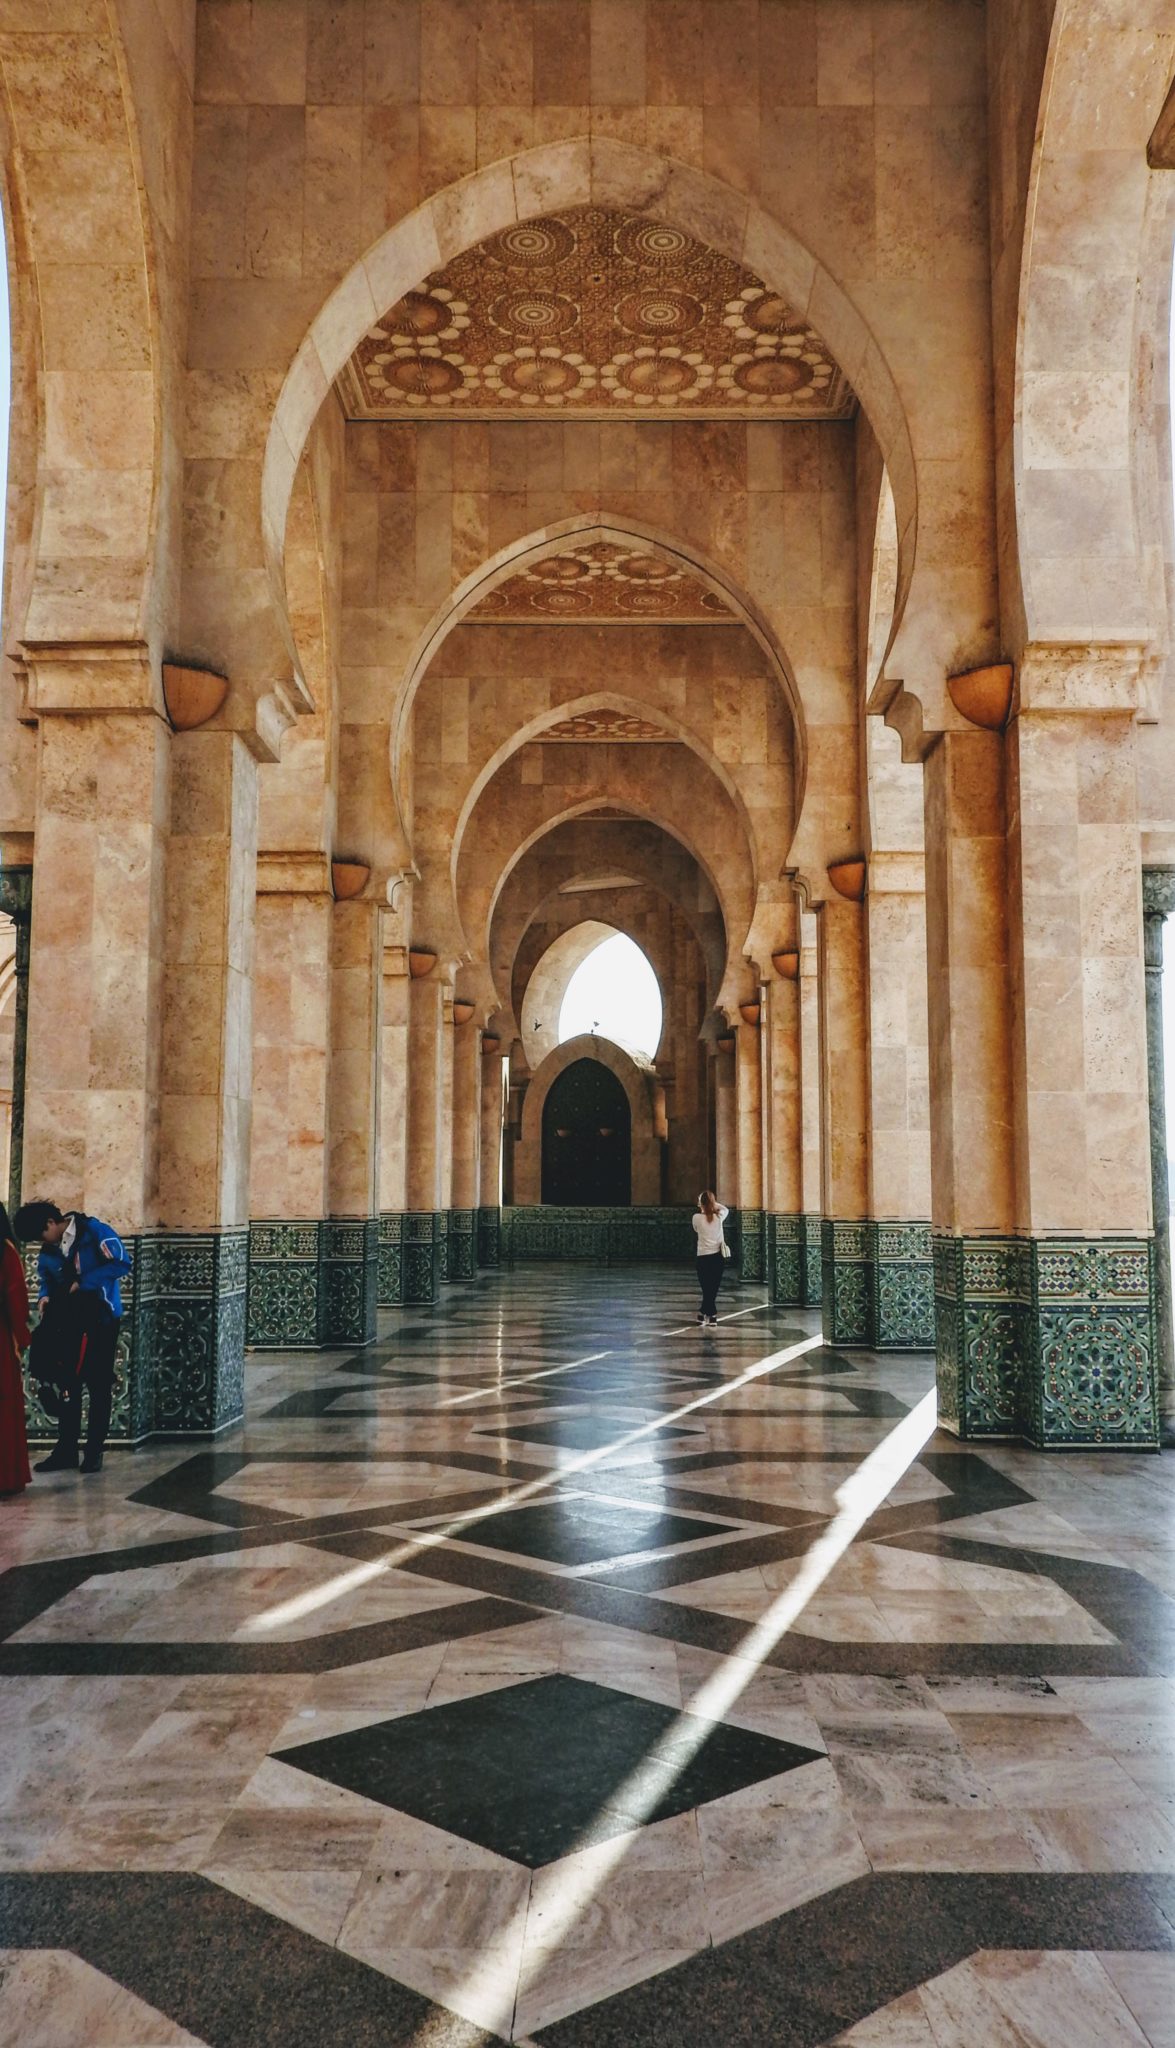 Mosque tiled and marble arches